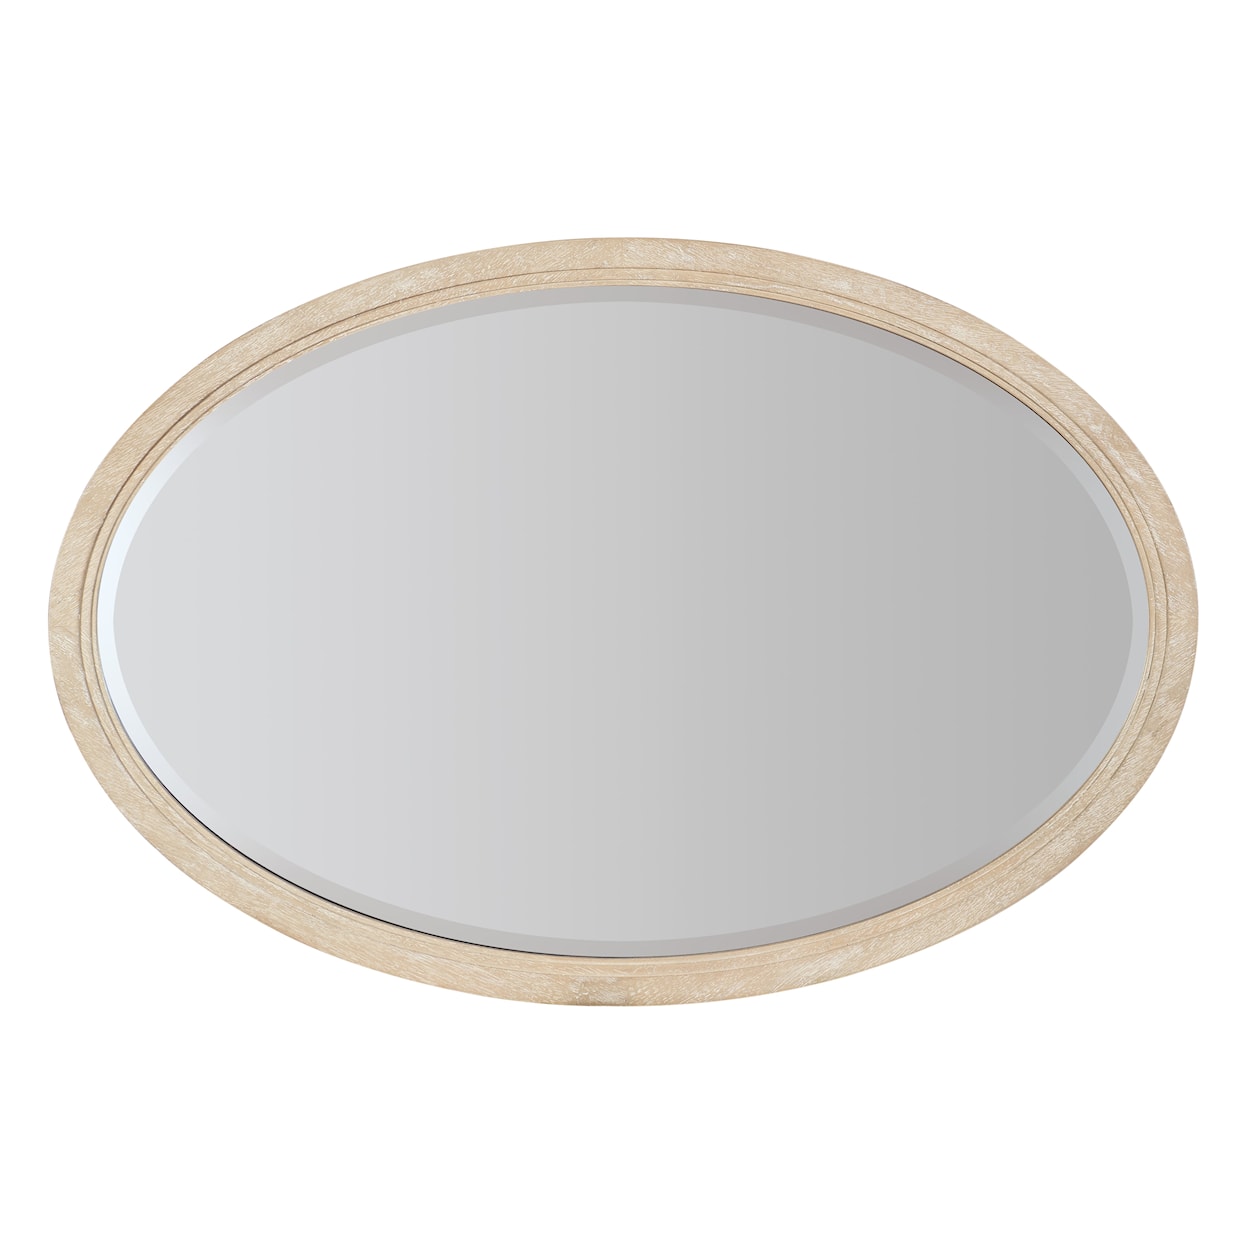 Hooker Furniture Nouveau Chic Oval Mirror